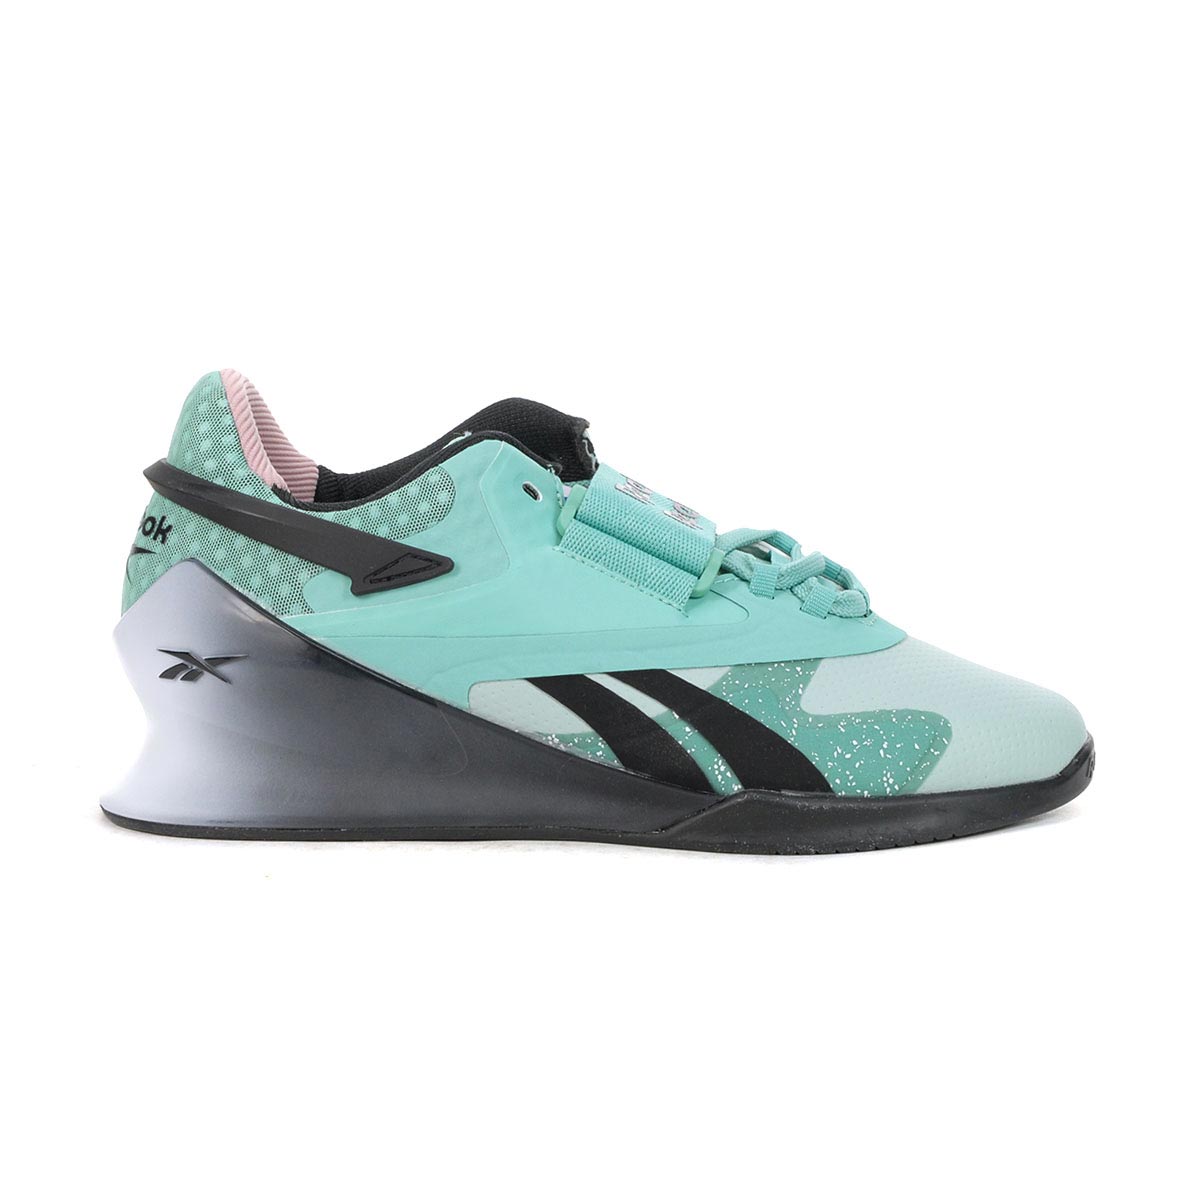 Reebok Women's Legacy Lifter II Teal/Grey/White Weightlifting Shoes 